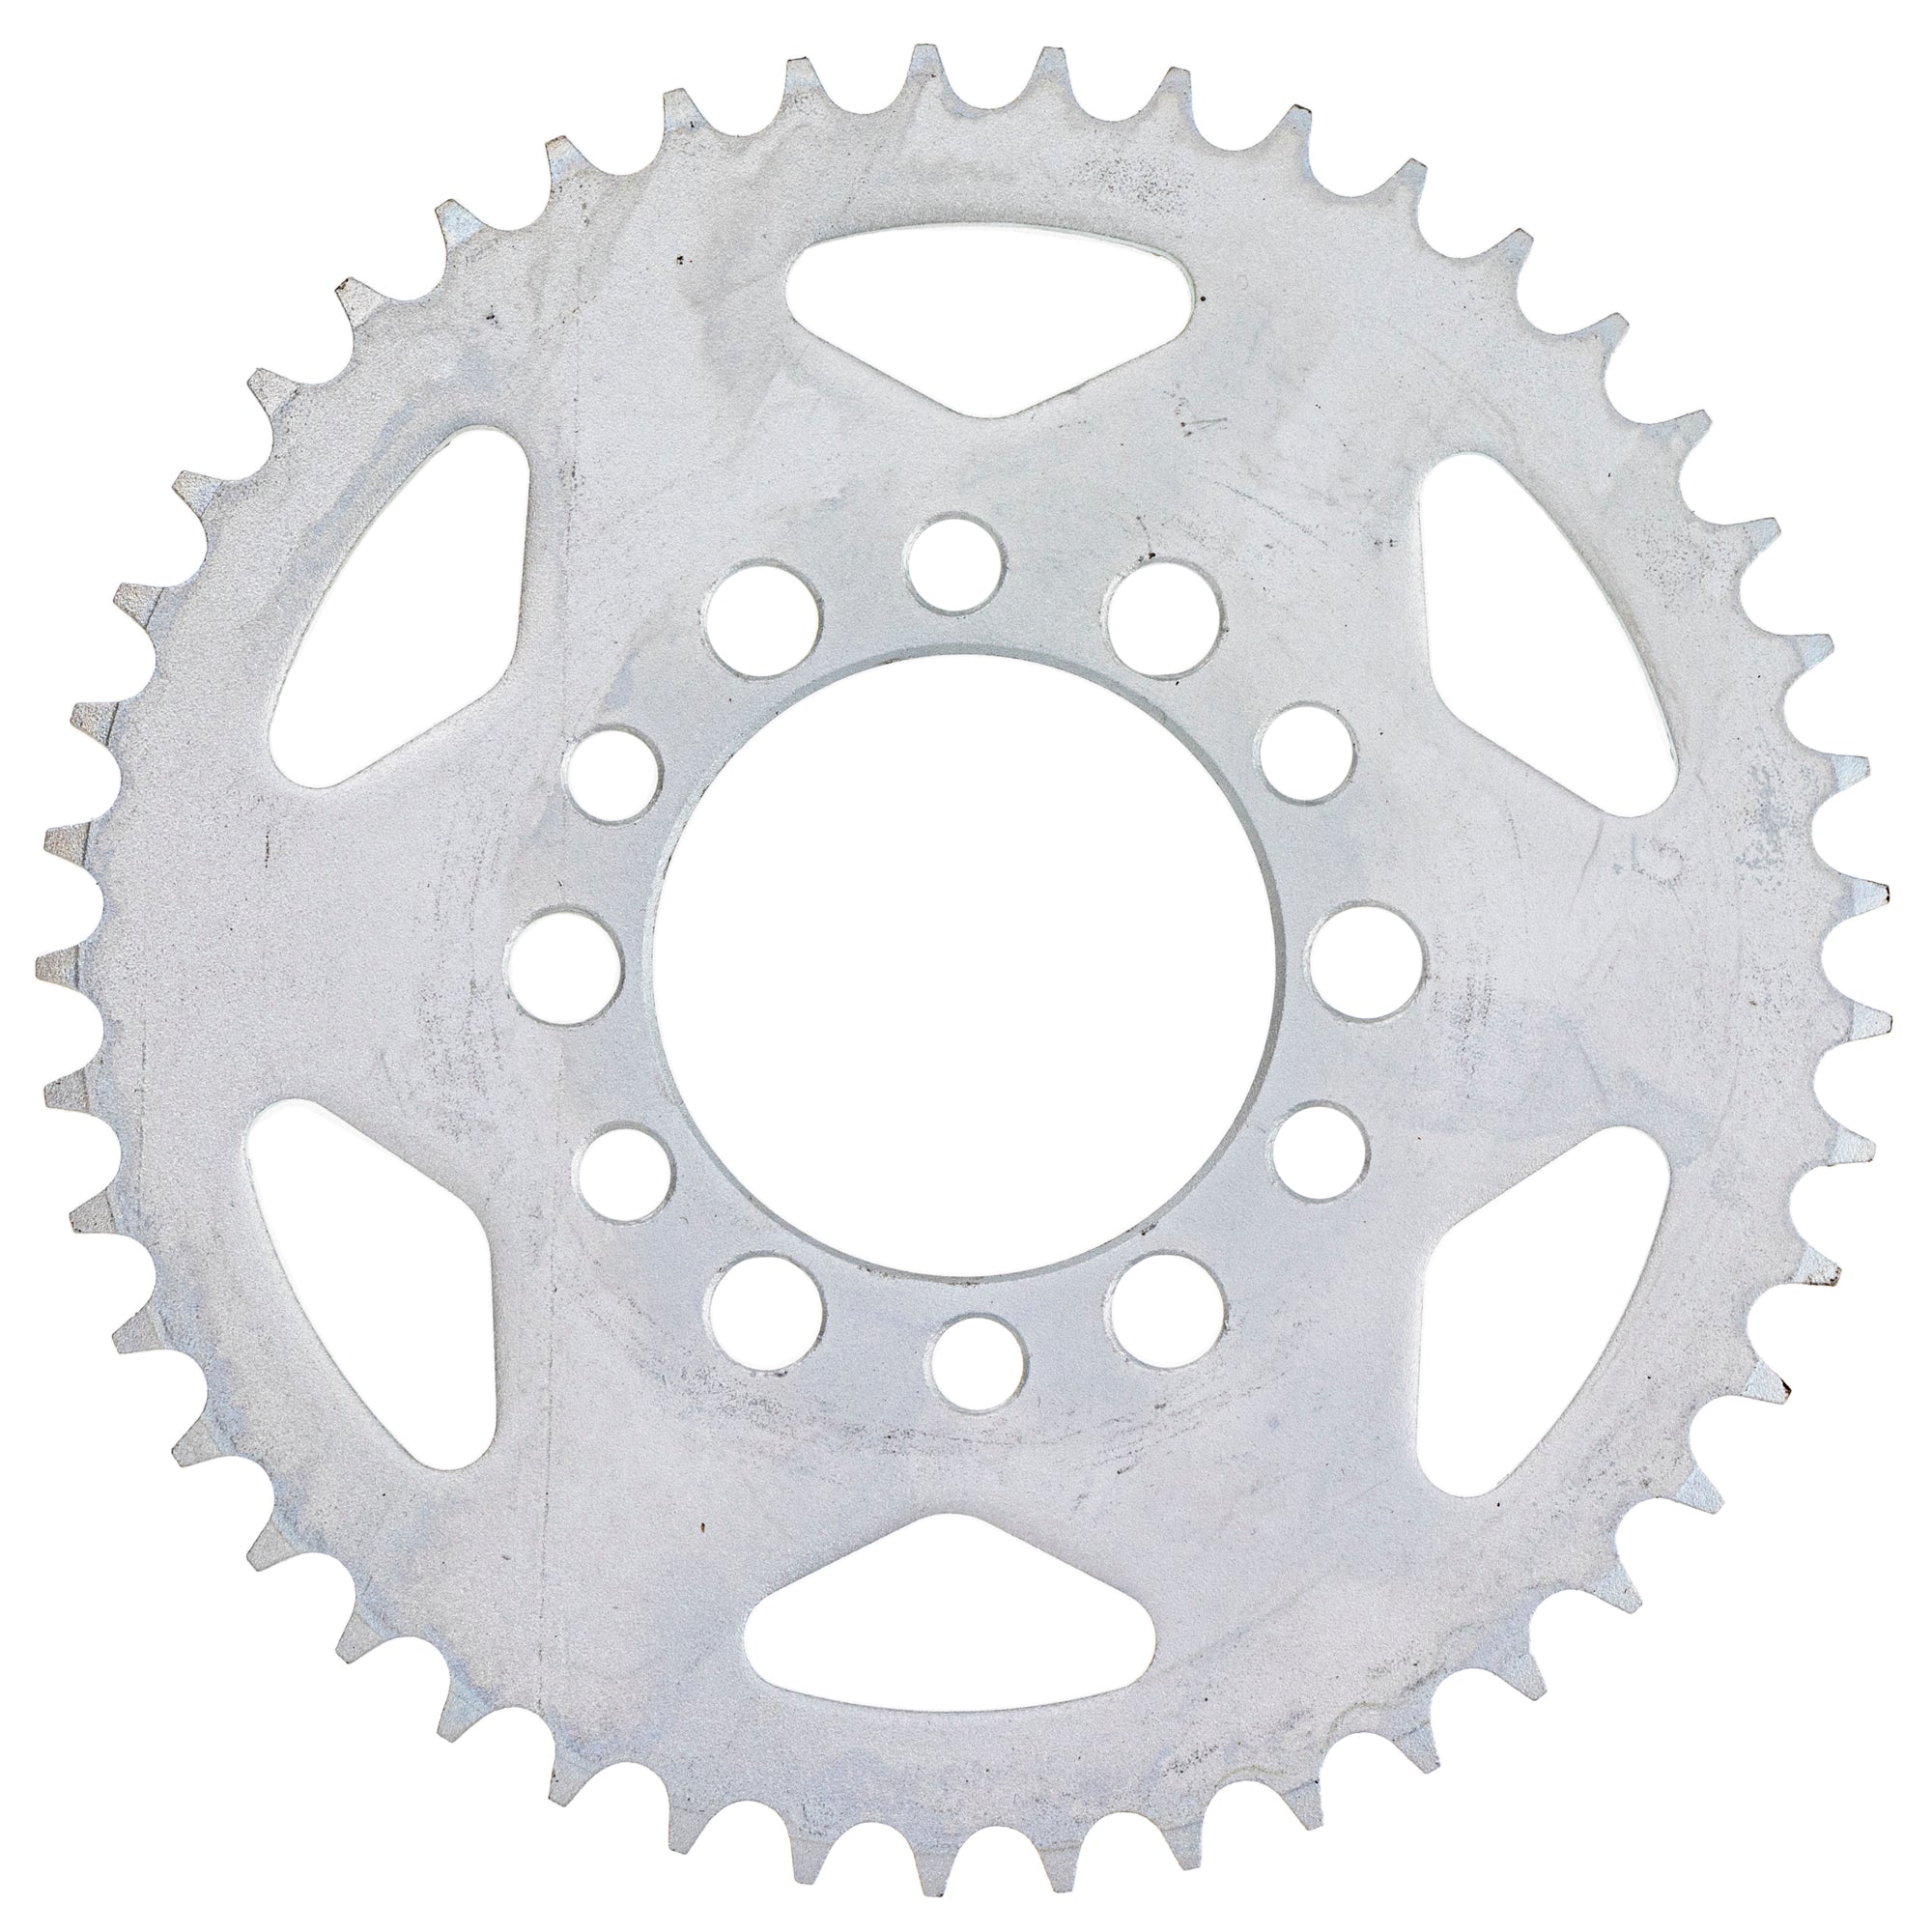 428 Pitch Front 15T Rear 45 Drive Sprocket Kit for Yamaha DT175